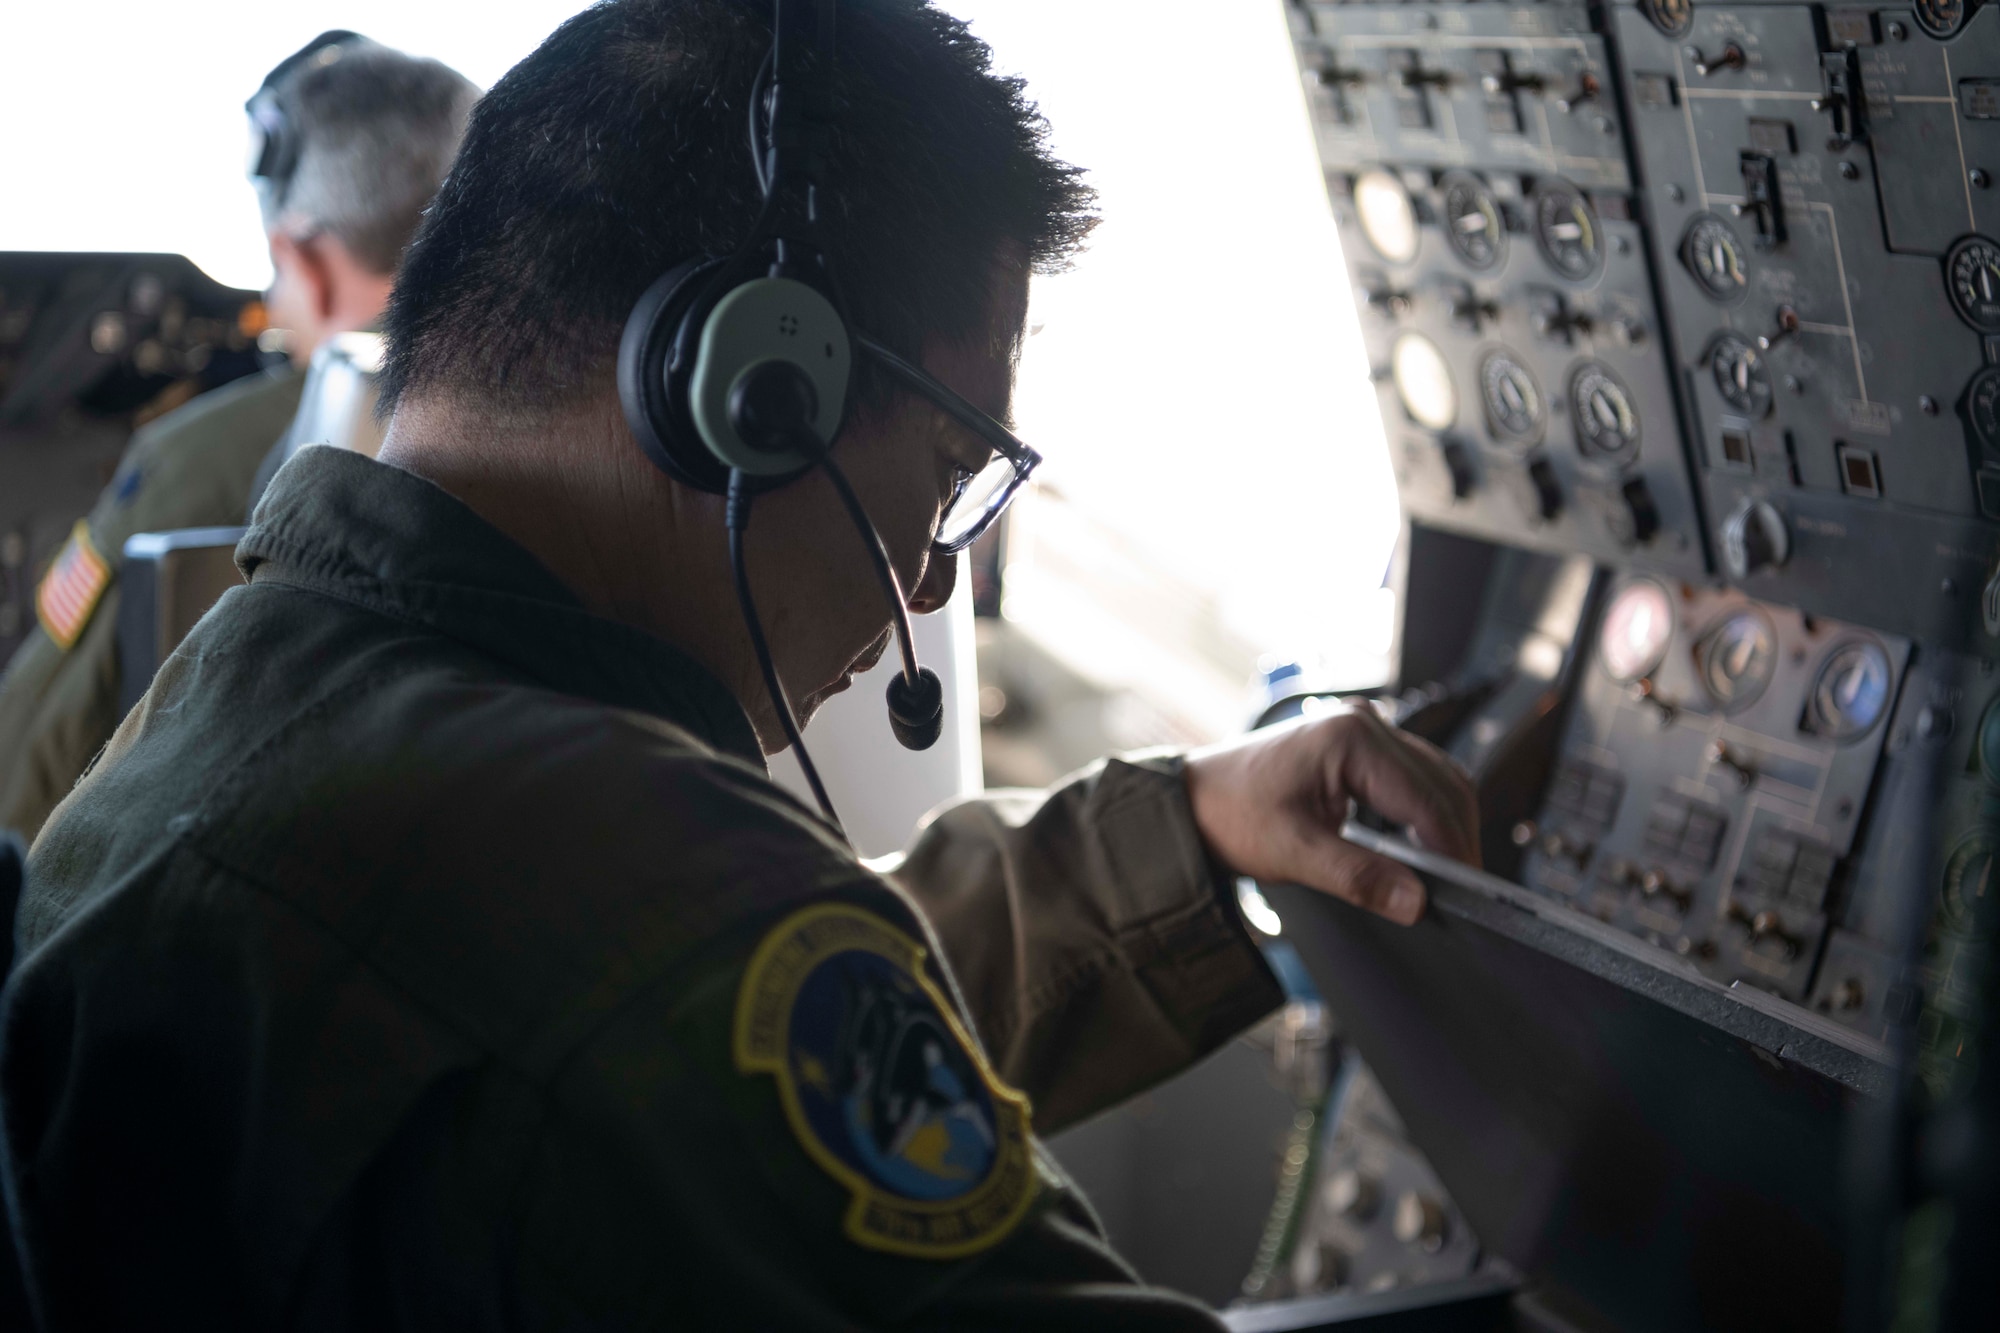 U.S. Air Force Staff Sgt. Taylor Dickson, 70th Aerial Refueling Squadron KC-10 Extender boom operator, operates the boom stick of a KC-10 Jan. 1, 2022, over southern California. The 70th ARS and 79th ARS offloaded 55,000 pounds of fuel to a B-2 spirit bomber in support of a flyover at the Rose Bowl and Tournament of Roses parade in Pasadena California. (U.S. Air Force photo by Senior Airman Alexander Merchak)